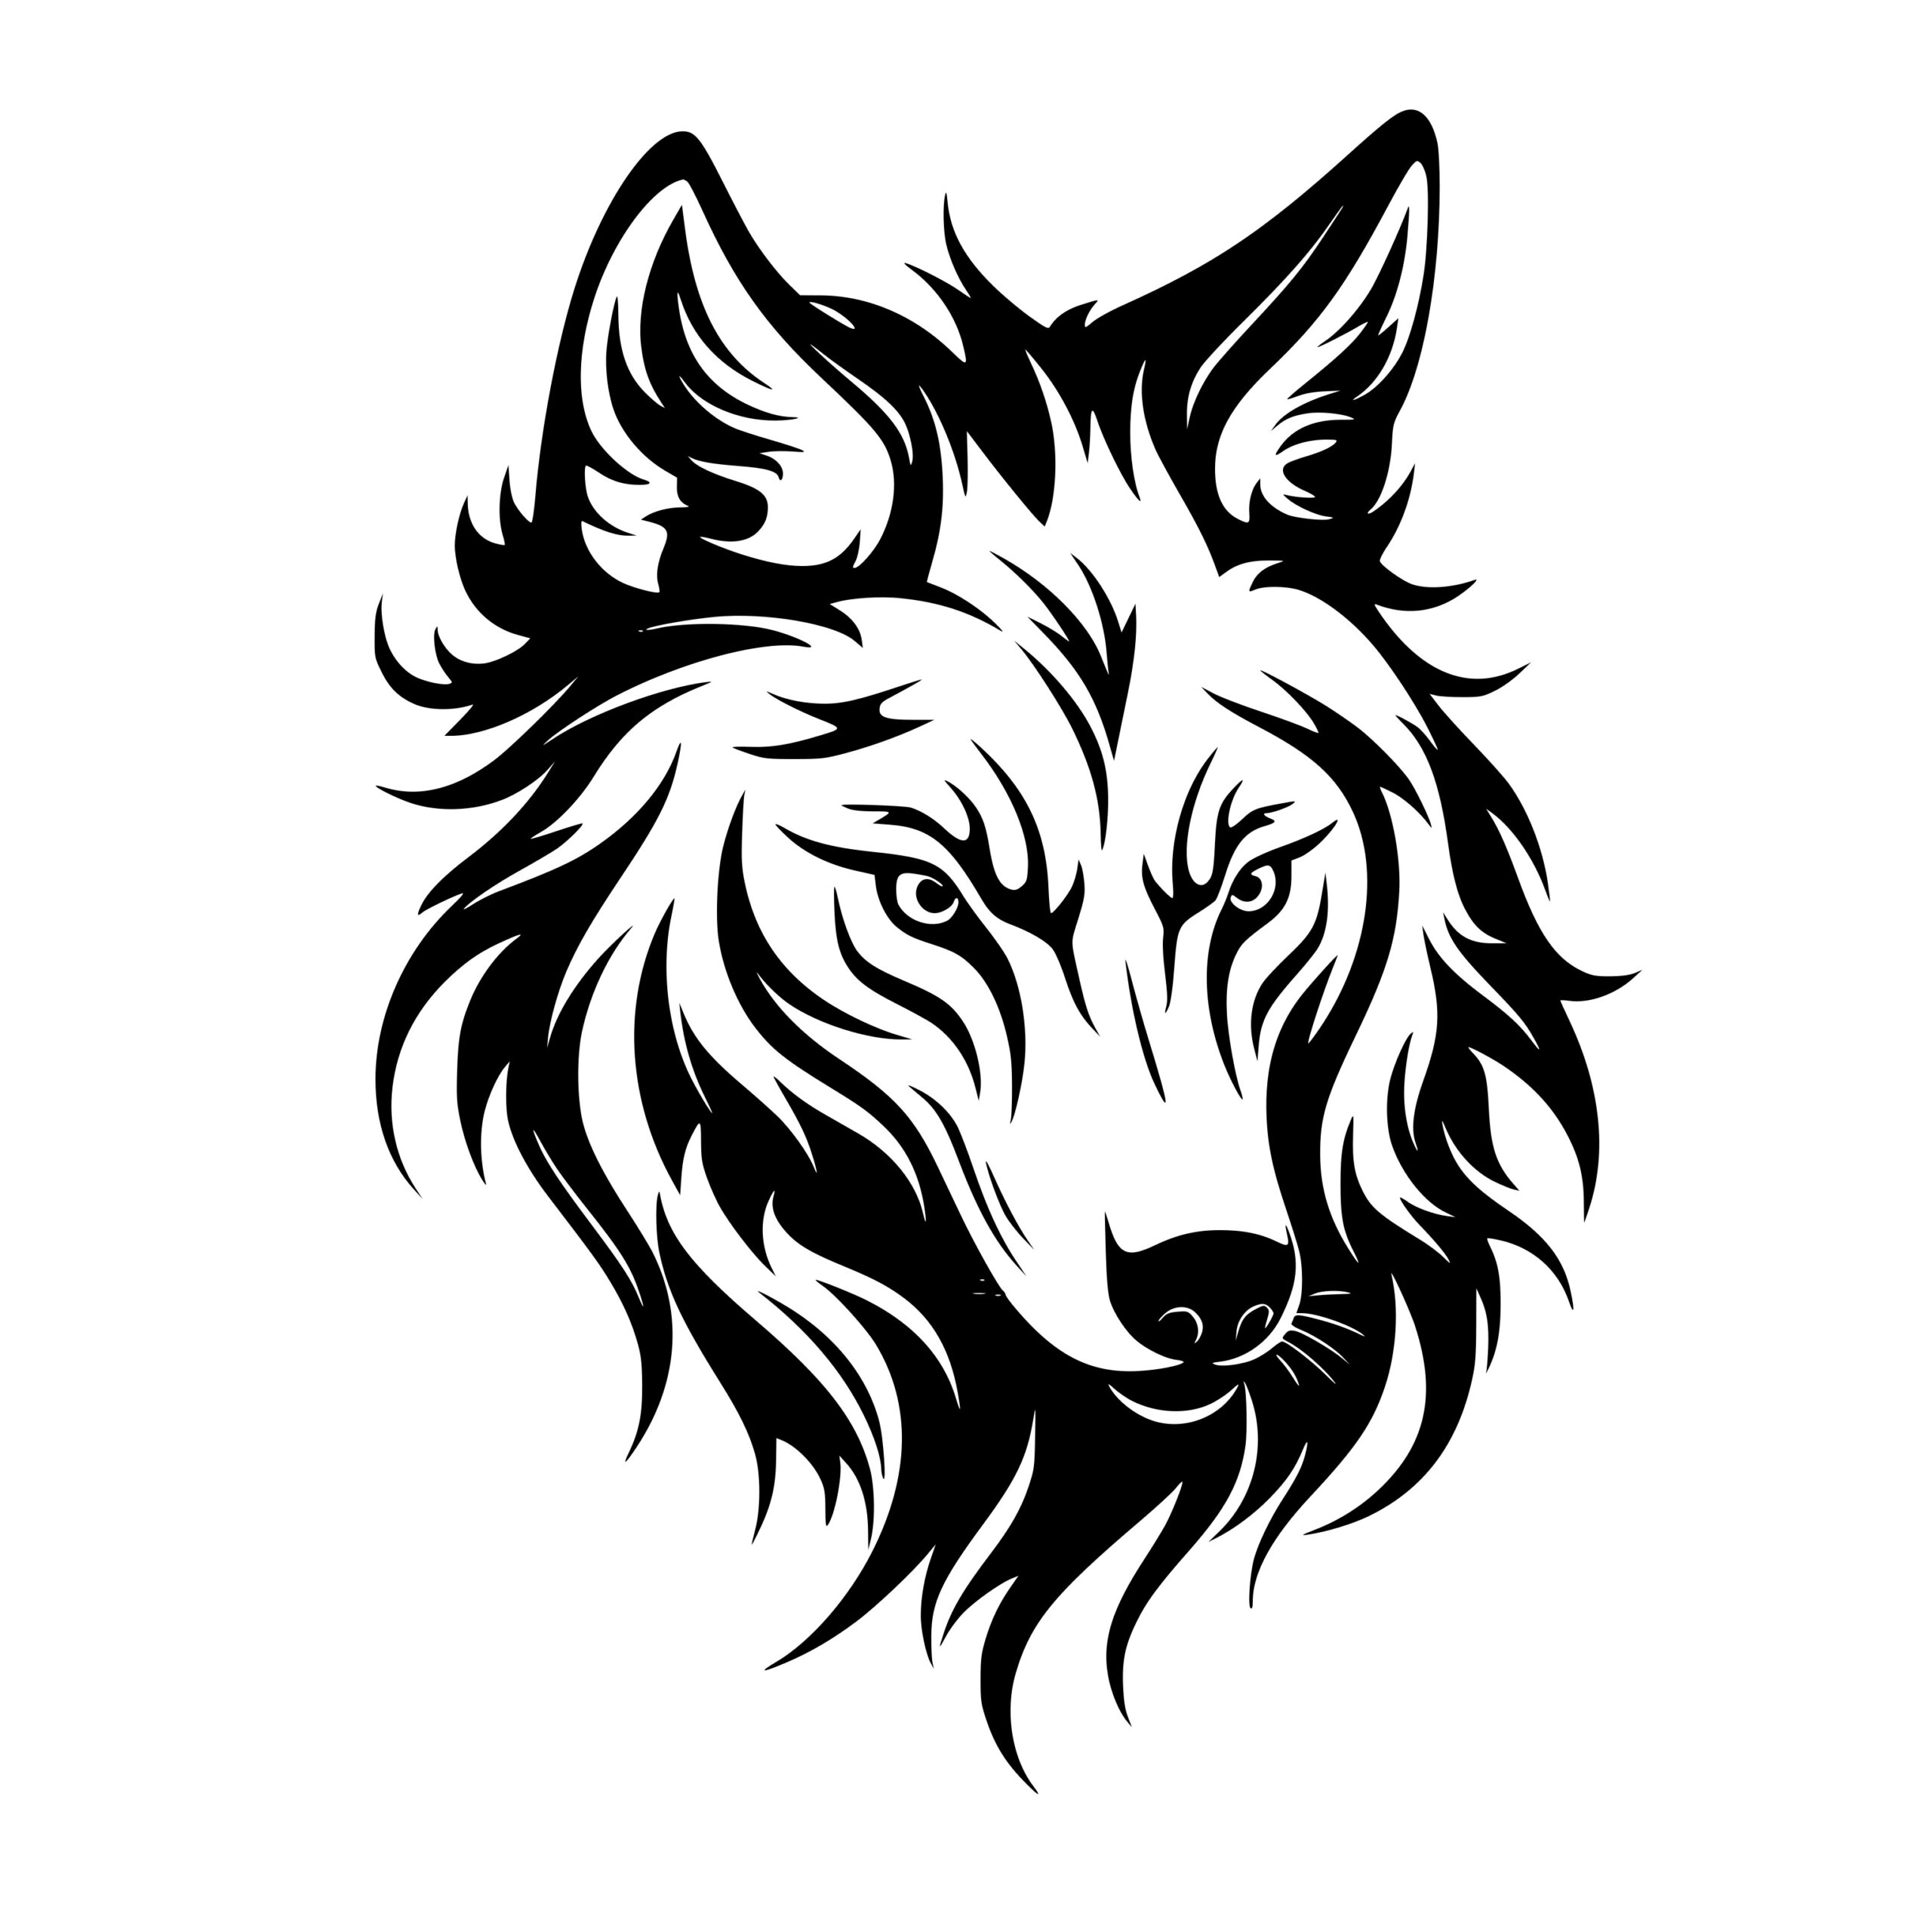 Mysterious Wolf: Instant Download Image for Cricut, Silhouette, and ...